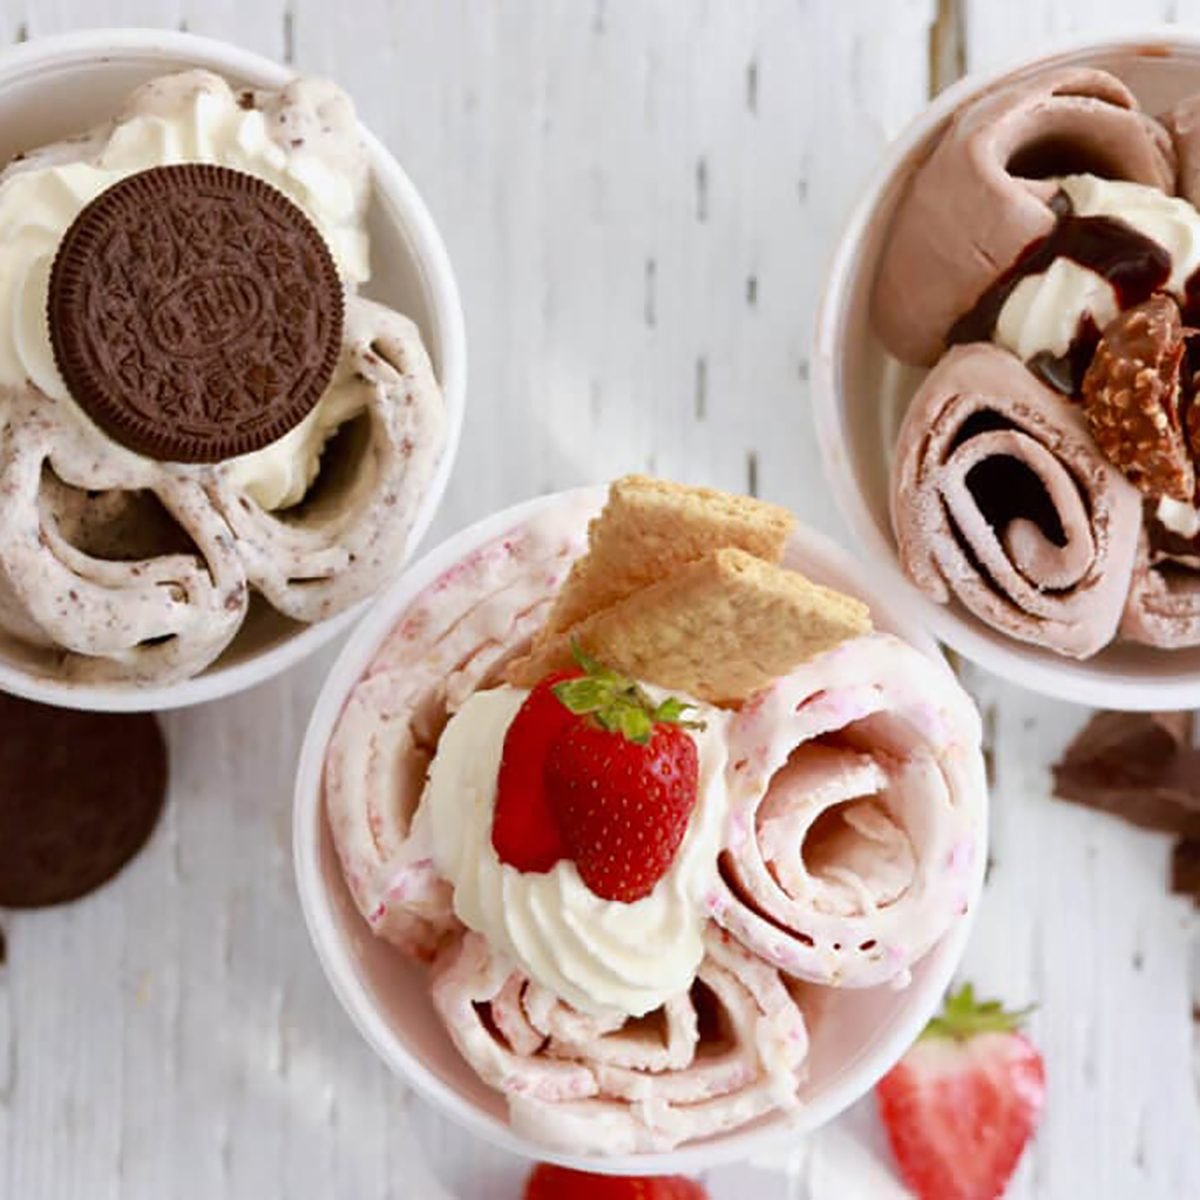 8 Unexpected Ways to Use an Ice Cream Scoop